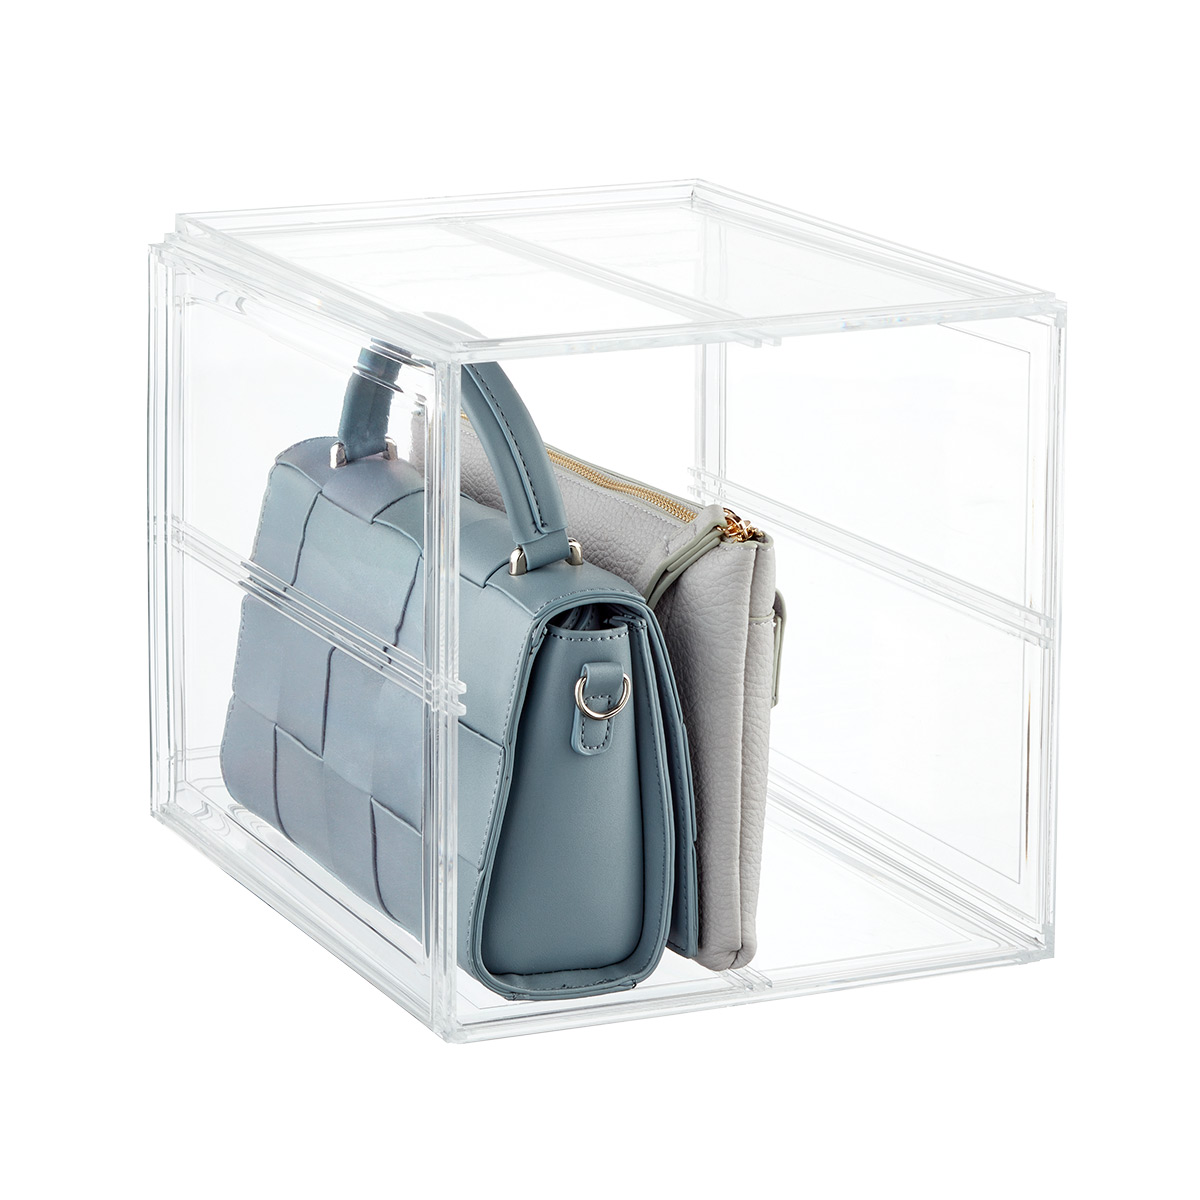 https://www.containerstore.com/catalogimages/445296/10088850_Divided_Handbag_Cube_Clear_.jpg